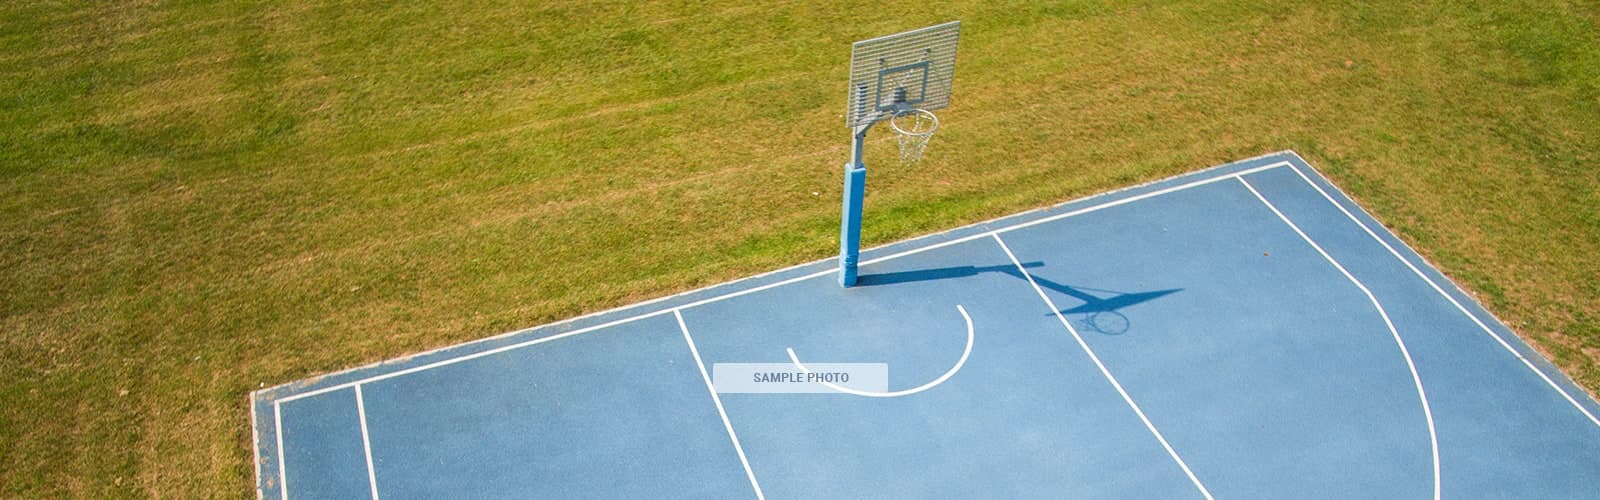 Turner Elementary School Outdoor Basketball Courts in Palm Bay Florida